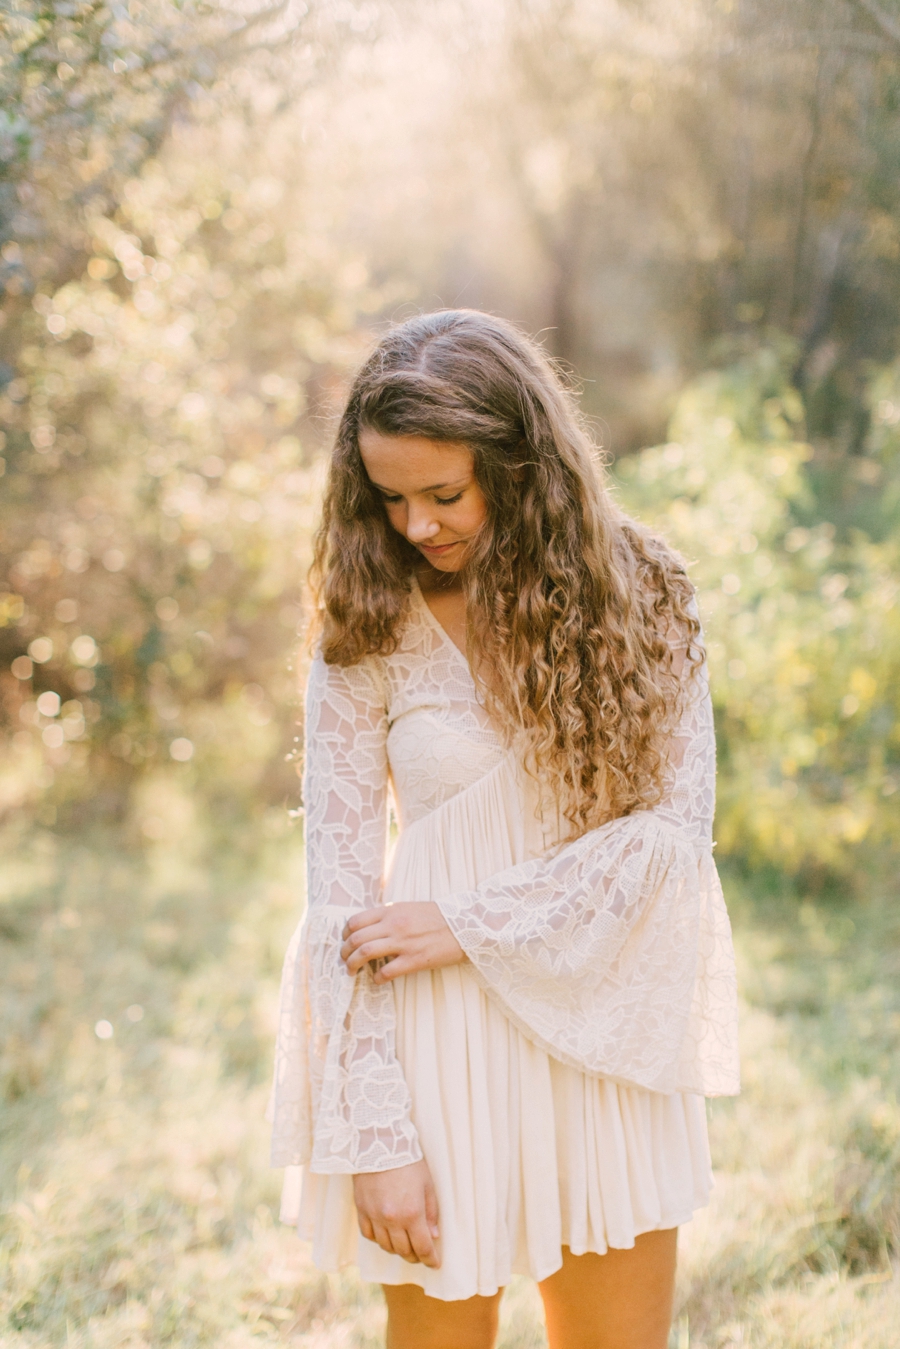 Daisy's Senior Session - Michelle Lillywhite Photography